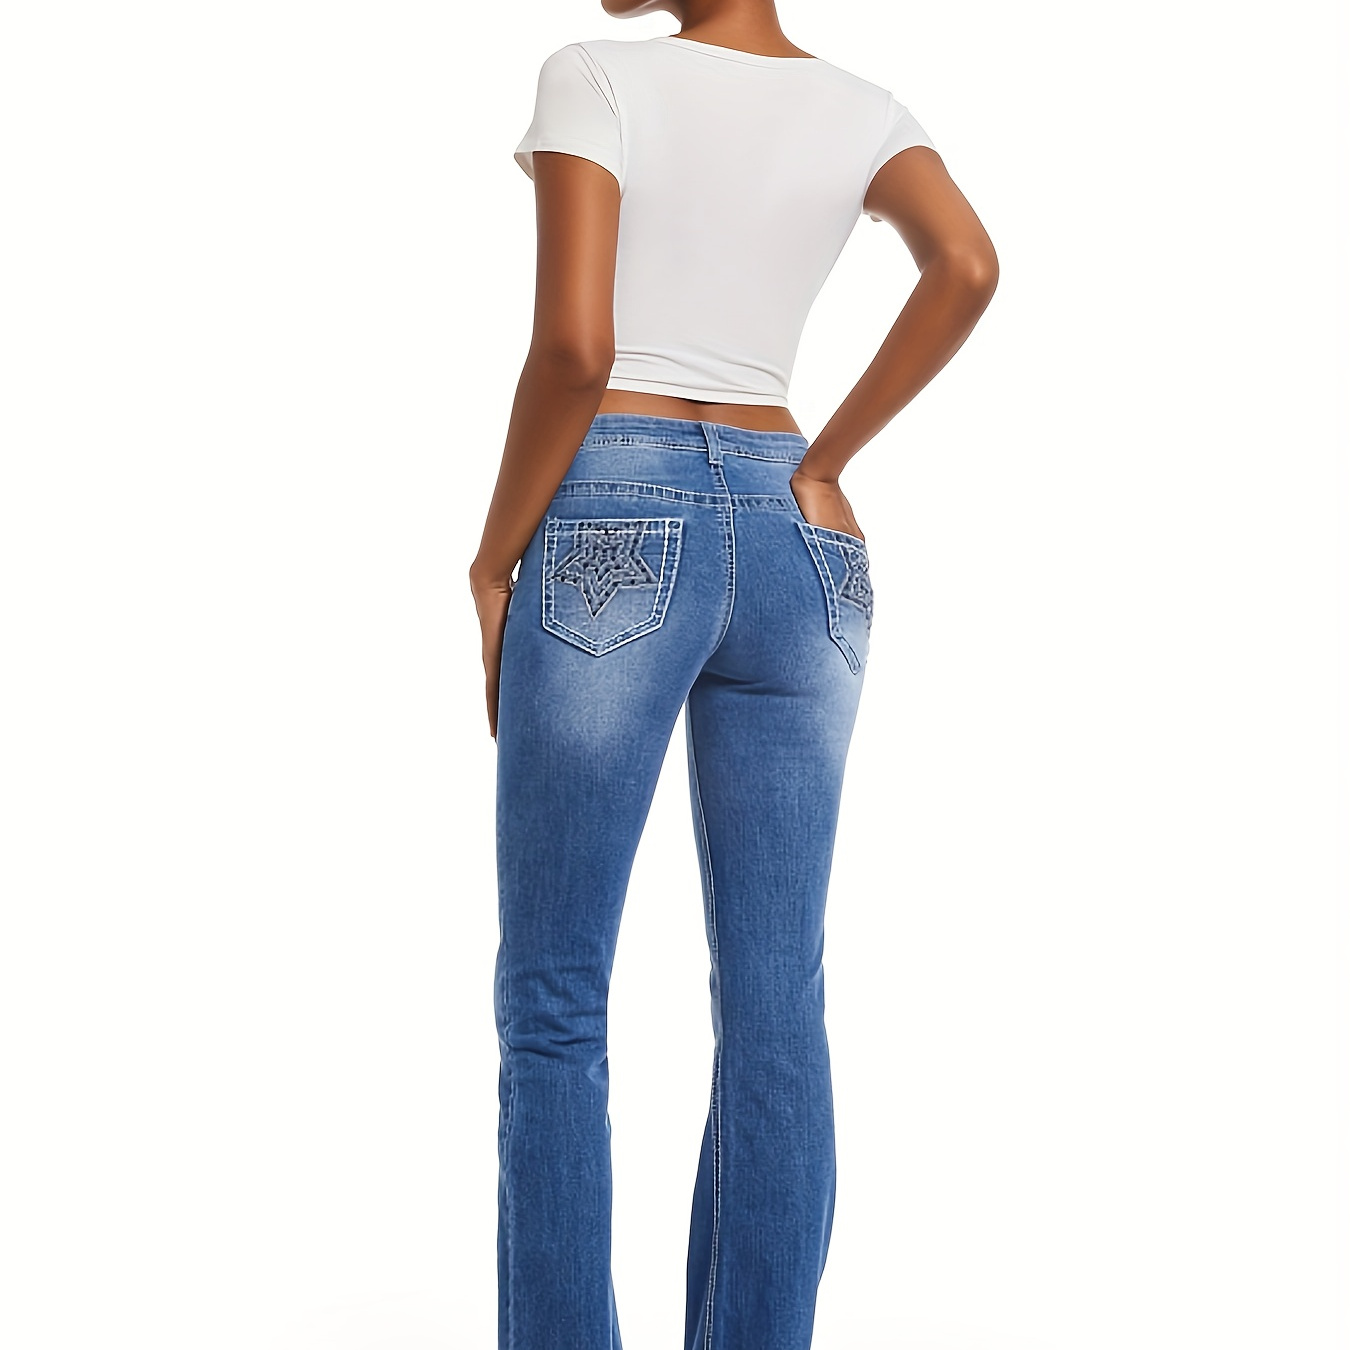 

Women's Slim-fit Blue Jeans, Classic Stretchy Denim, Casual Style, Versatile And Comfortable All-season Wear, Sexy